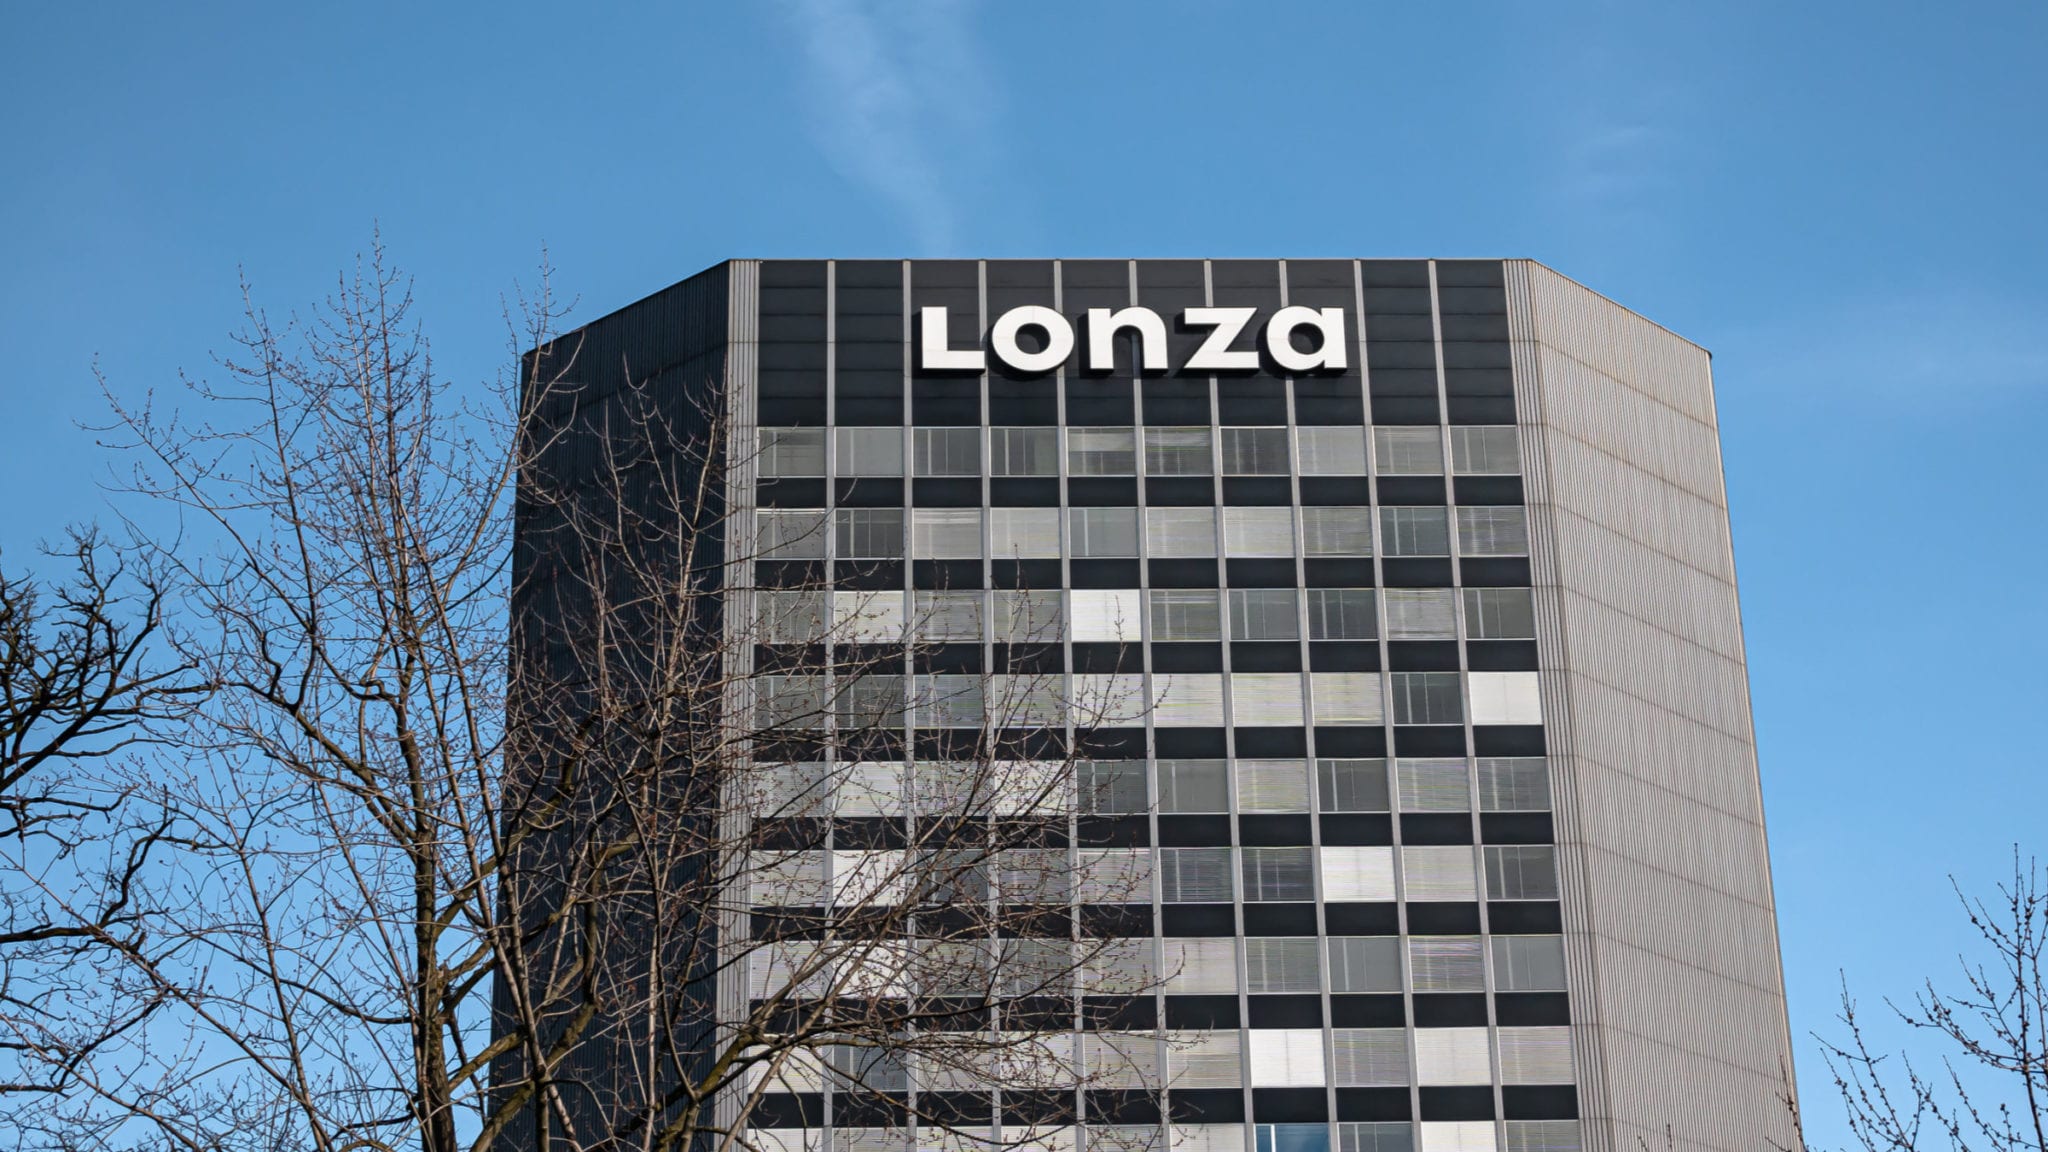 Lonza offloads specialty ingredients unit in $4.7B sale to Bain Capital, Cinven in consolidation around biopharma